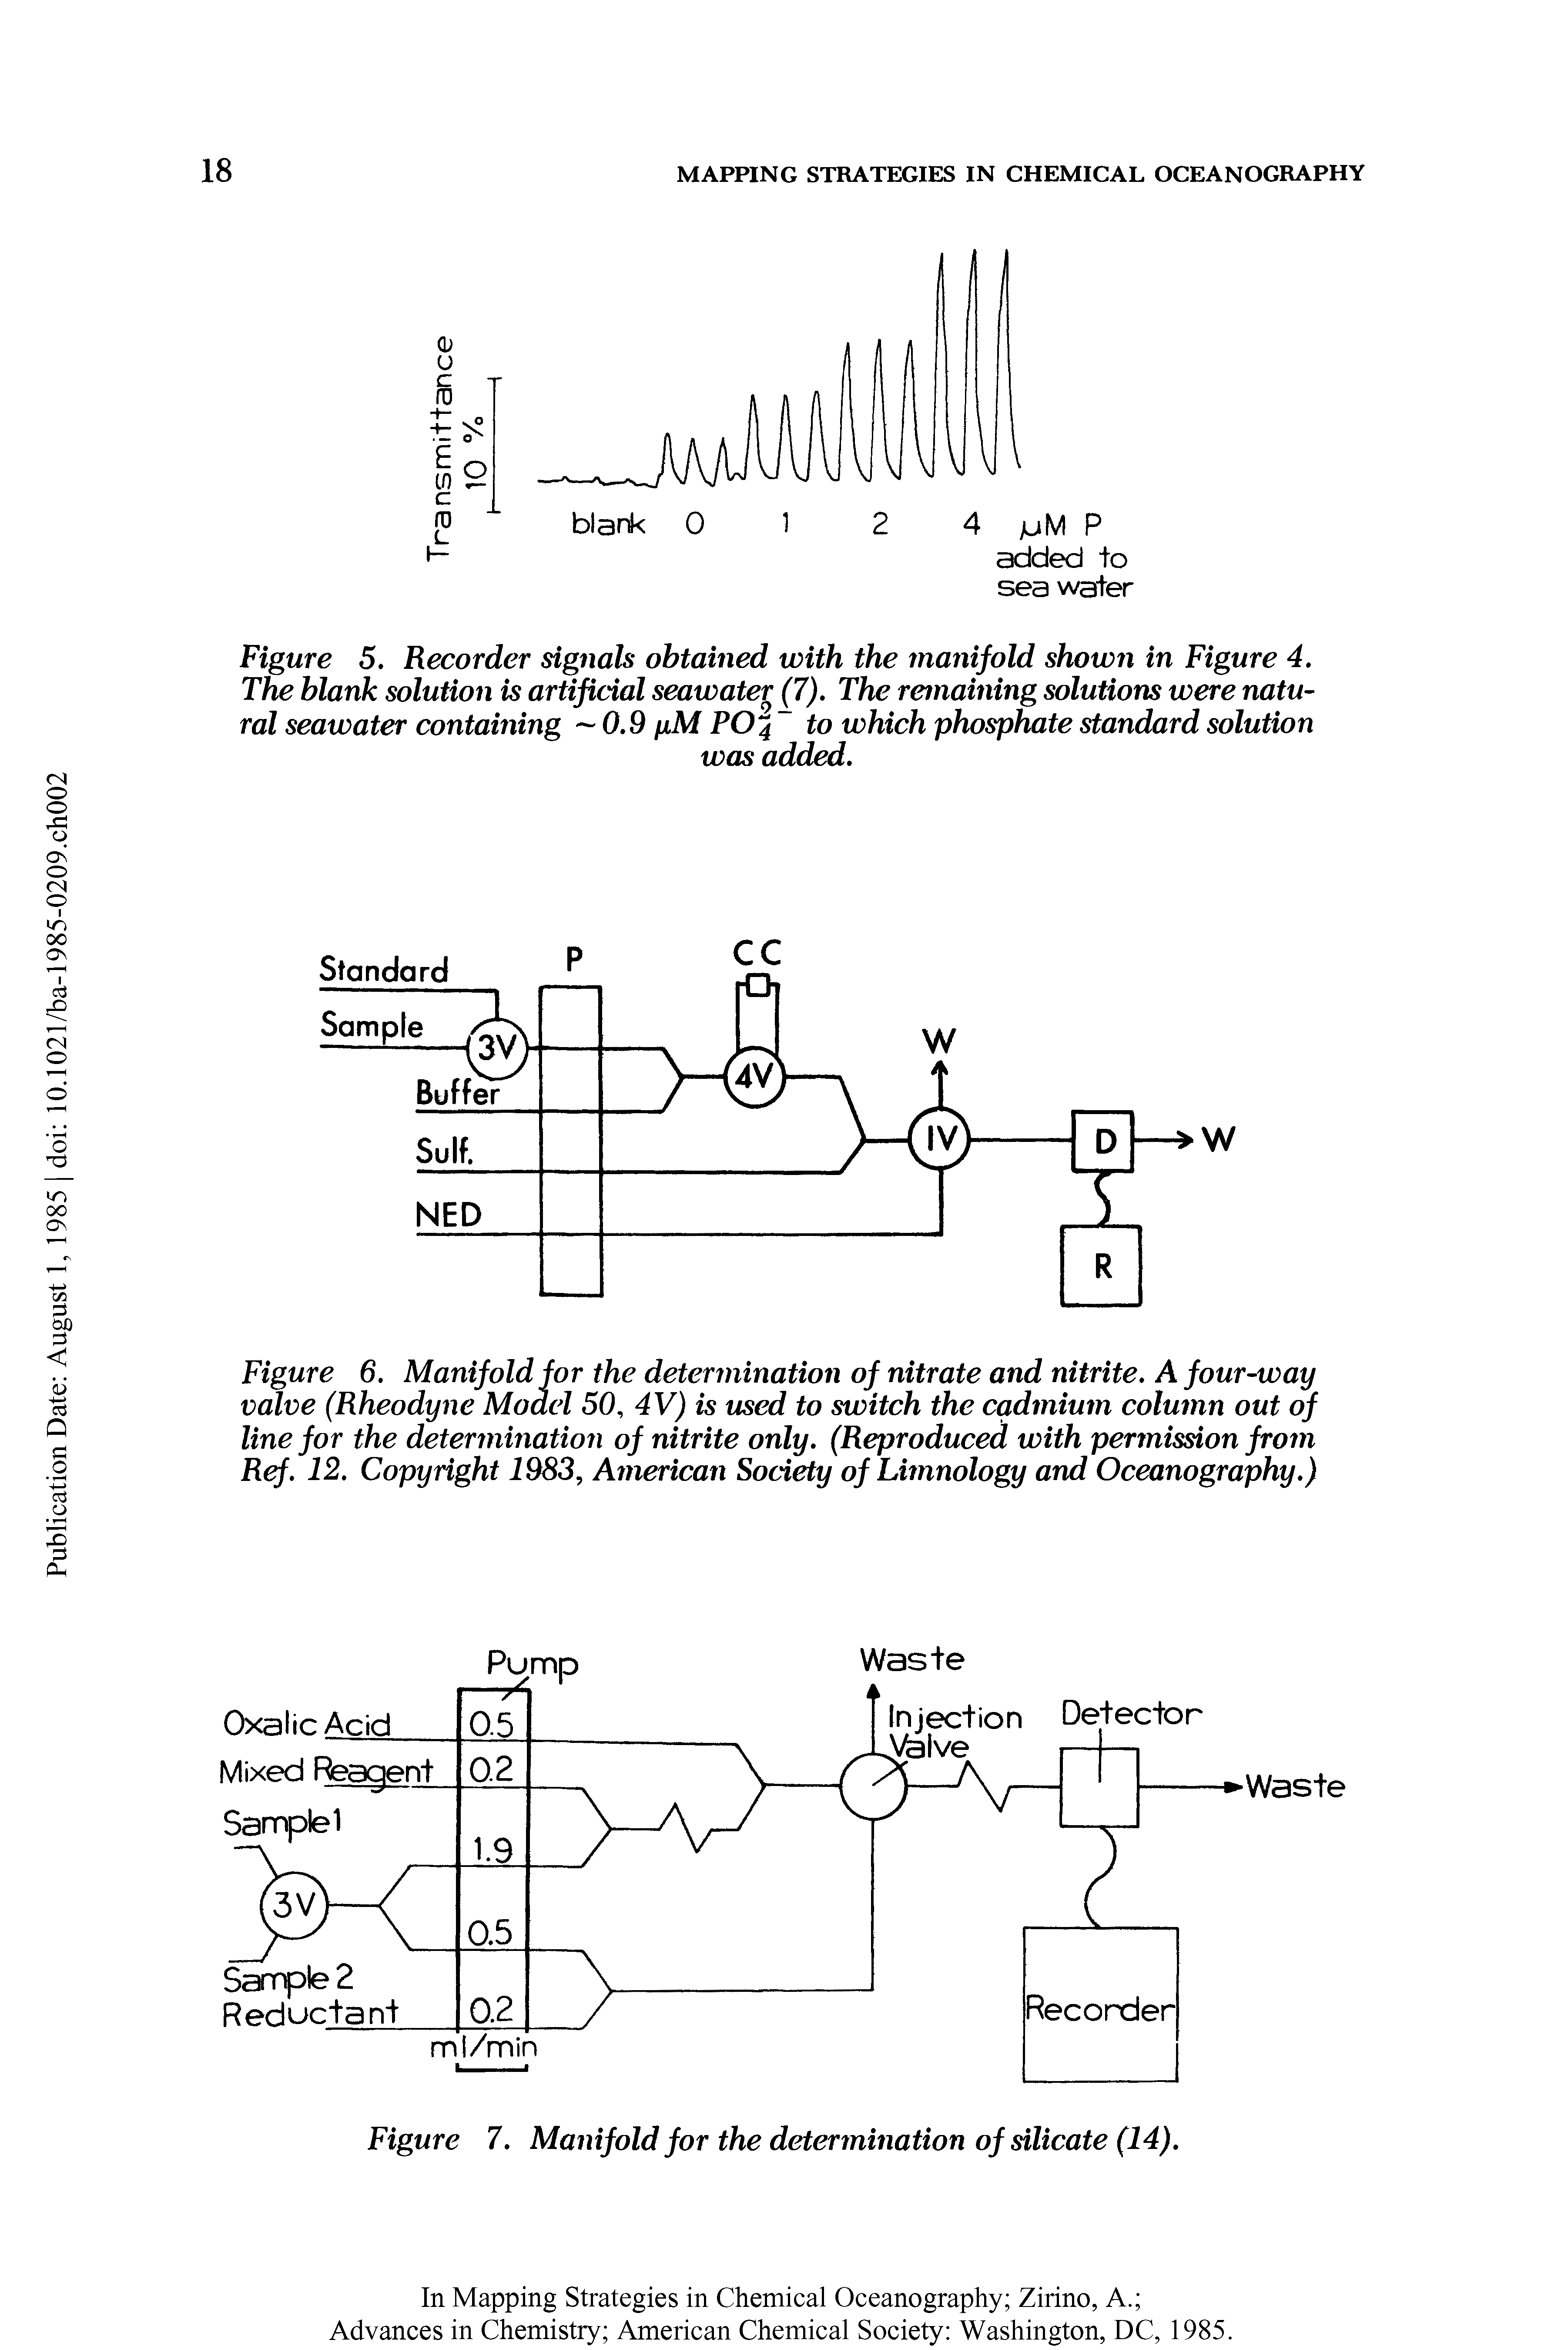 Figure 6. Manifold for the detertnination of nitrate and nitrite. A four-way valve (Rheodyne Model 50, 4V) is used to switch the cadmium column out of line for the determinatioii of nitrite only. (Reproduced with permission from Ref. 12. Copyright 1983, American Society of Limnology and Oceanography.)...